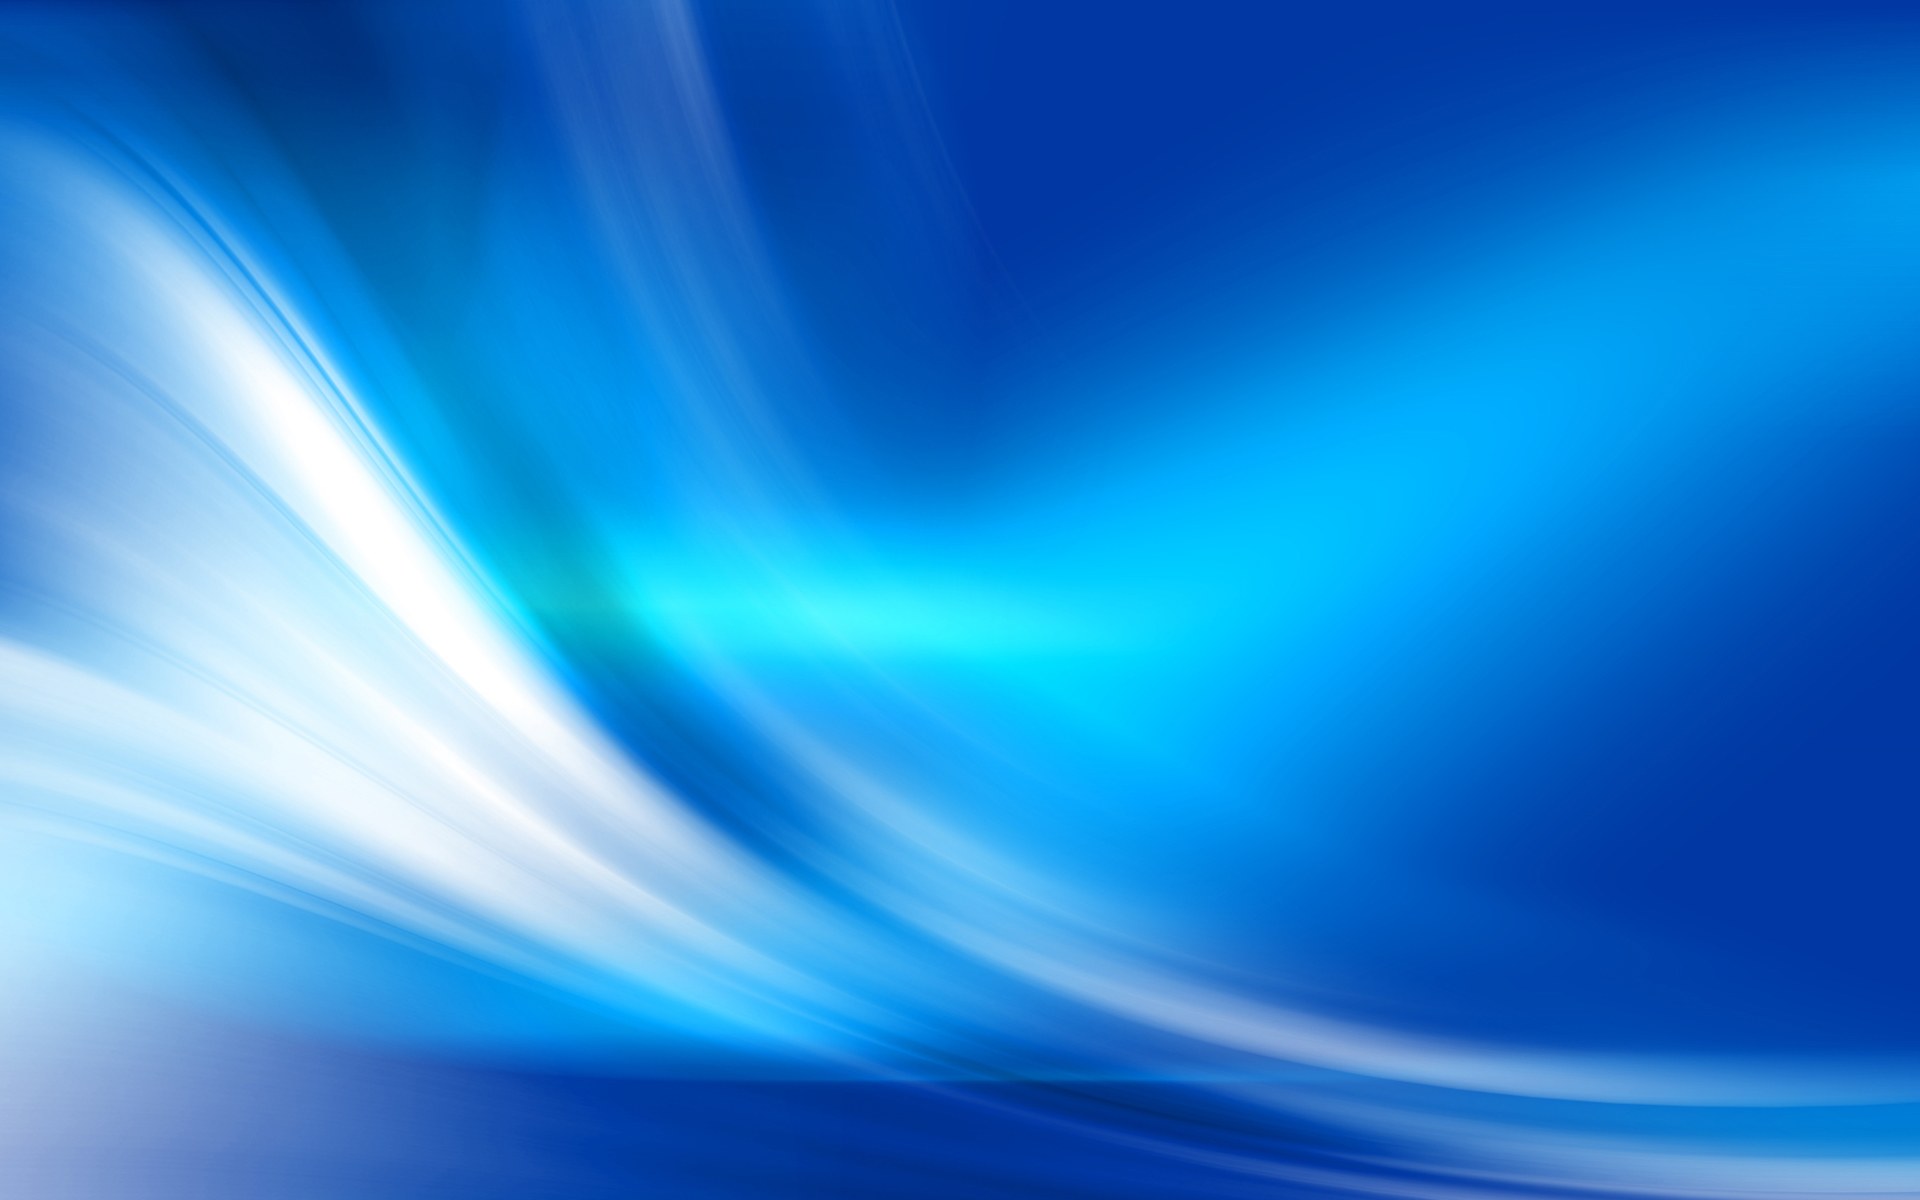 Abstract Blue 2615 Hd Wallpapers in Abstract   Imagescicom